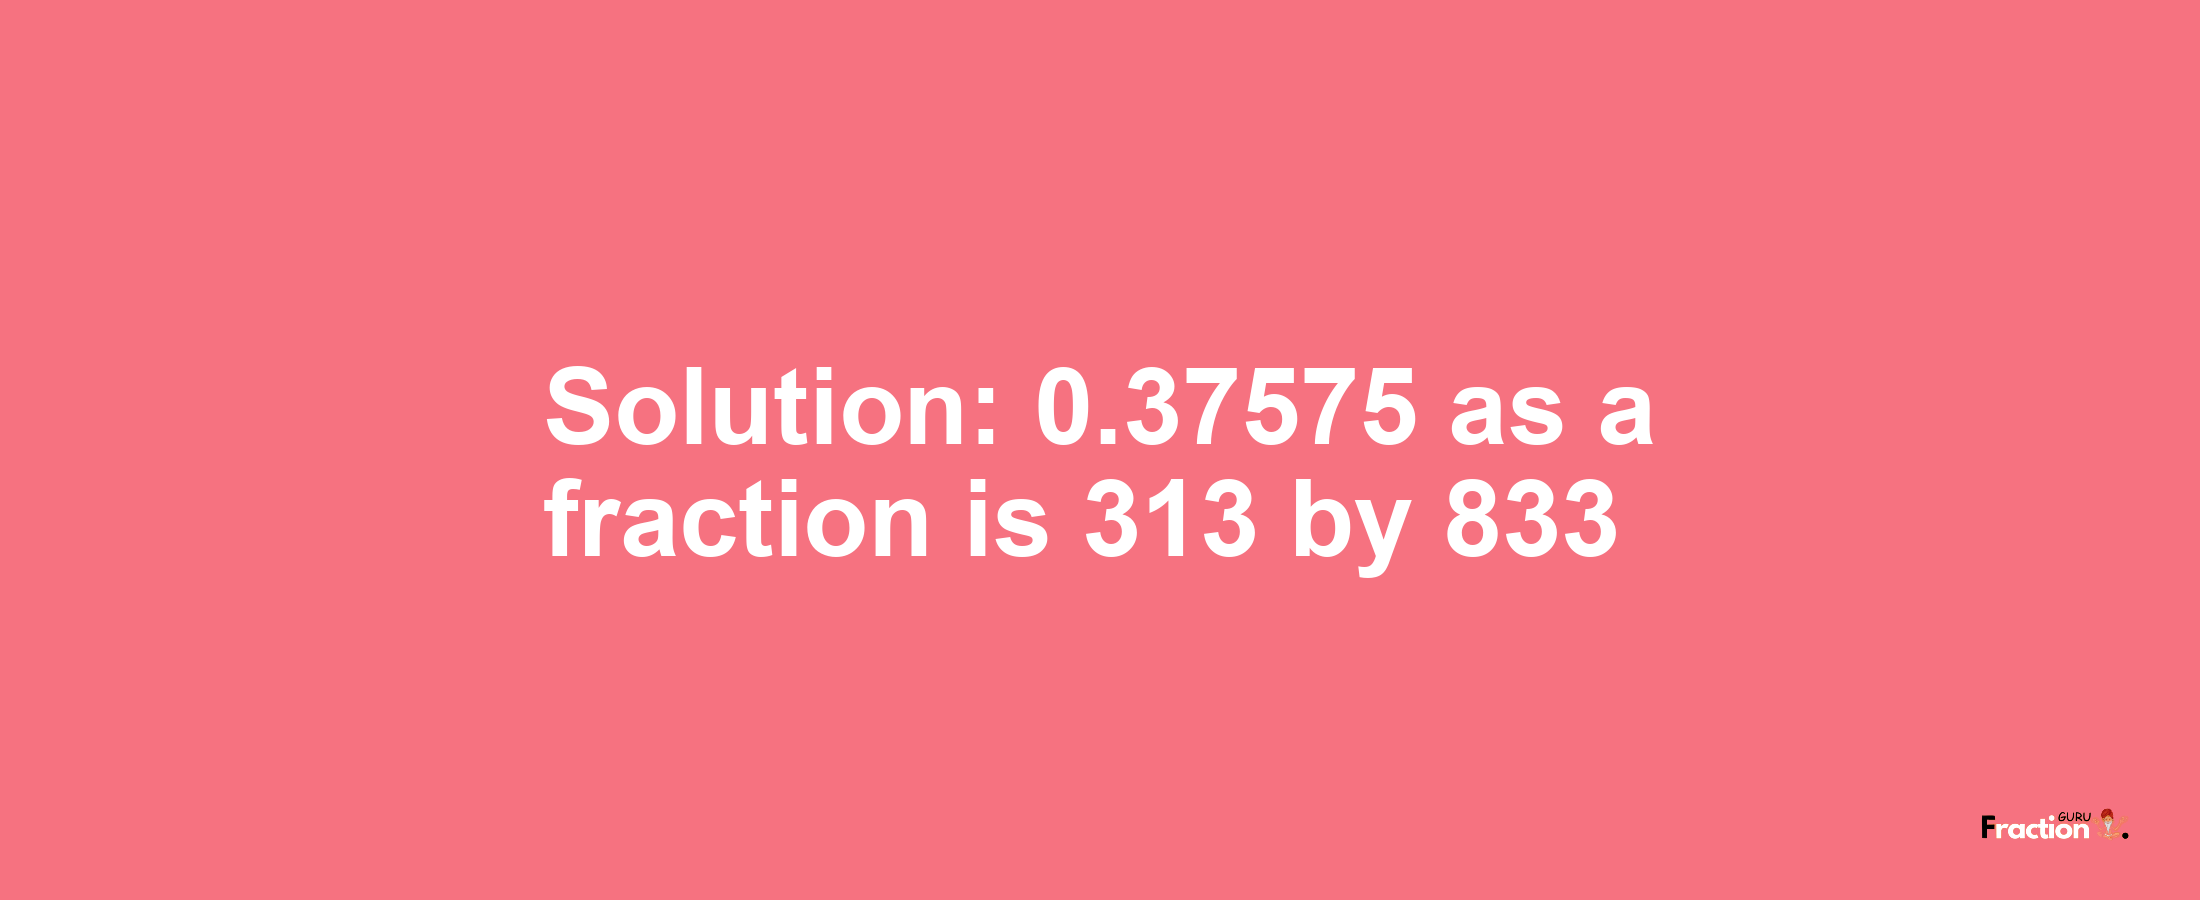 Solution:0.37575 as a fraction is 313/833